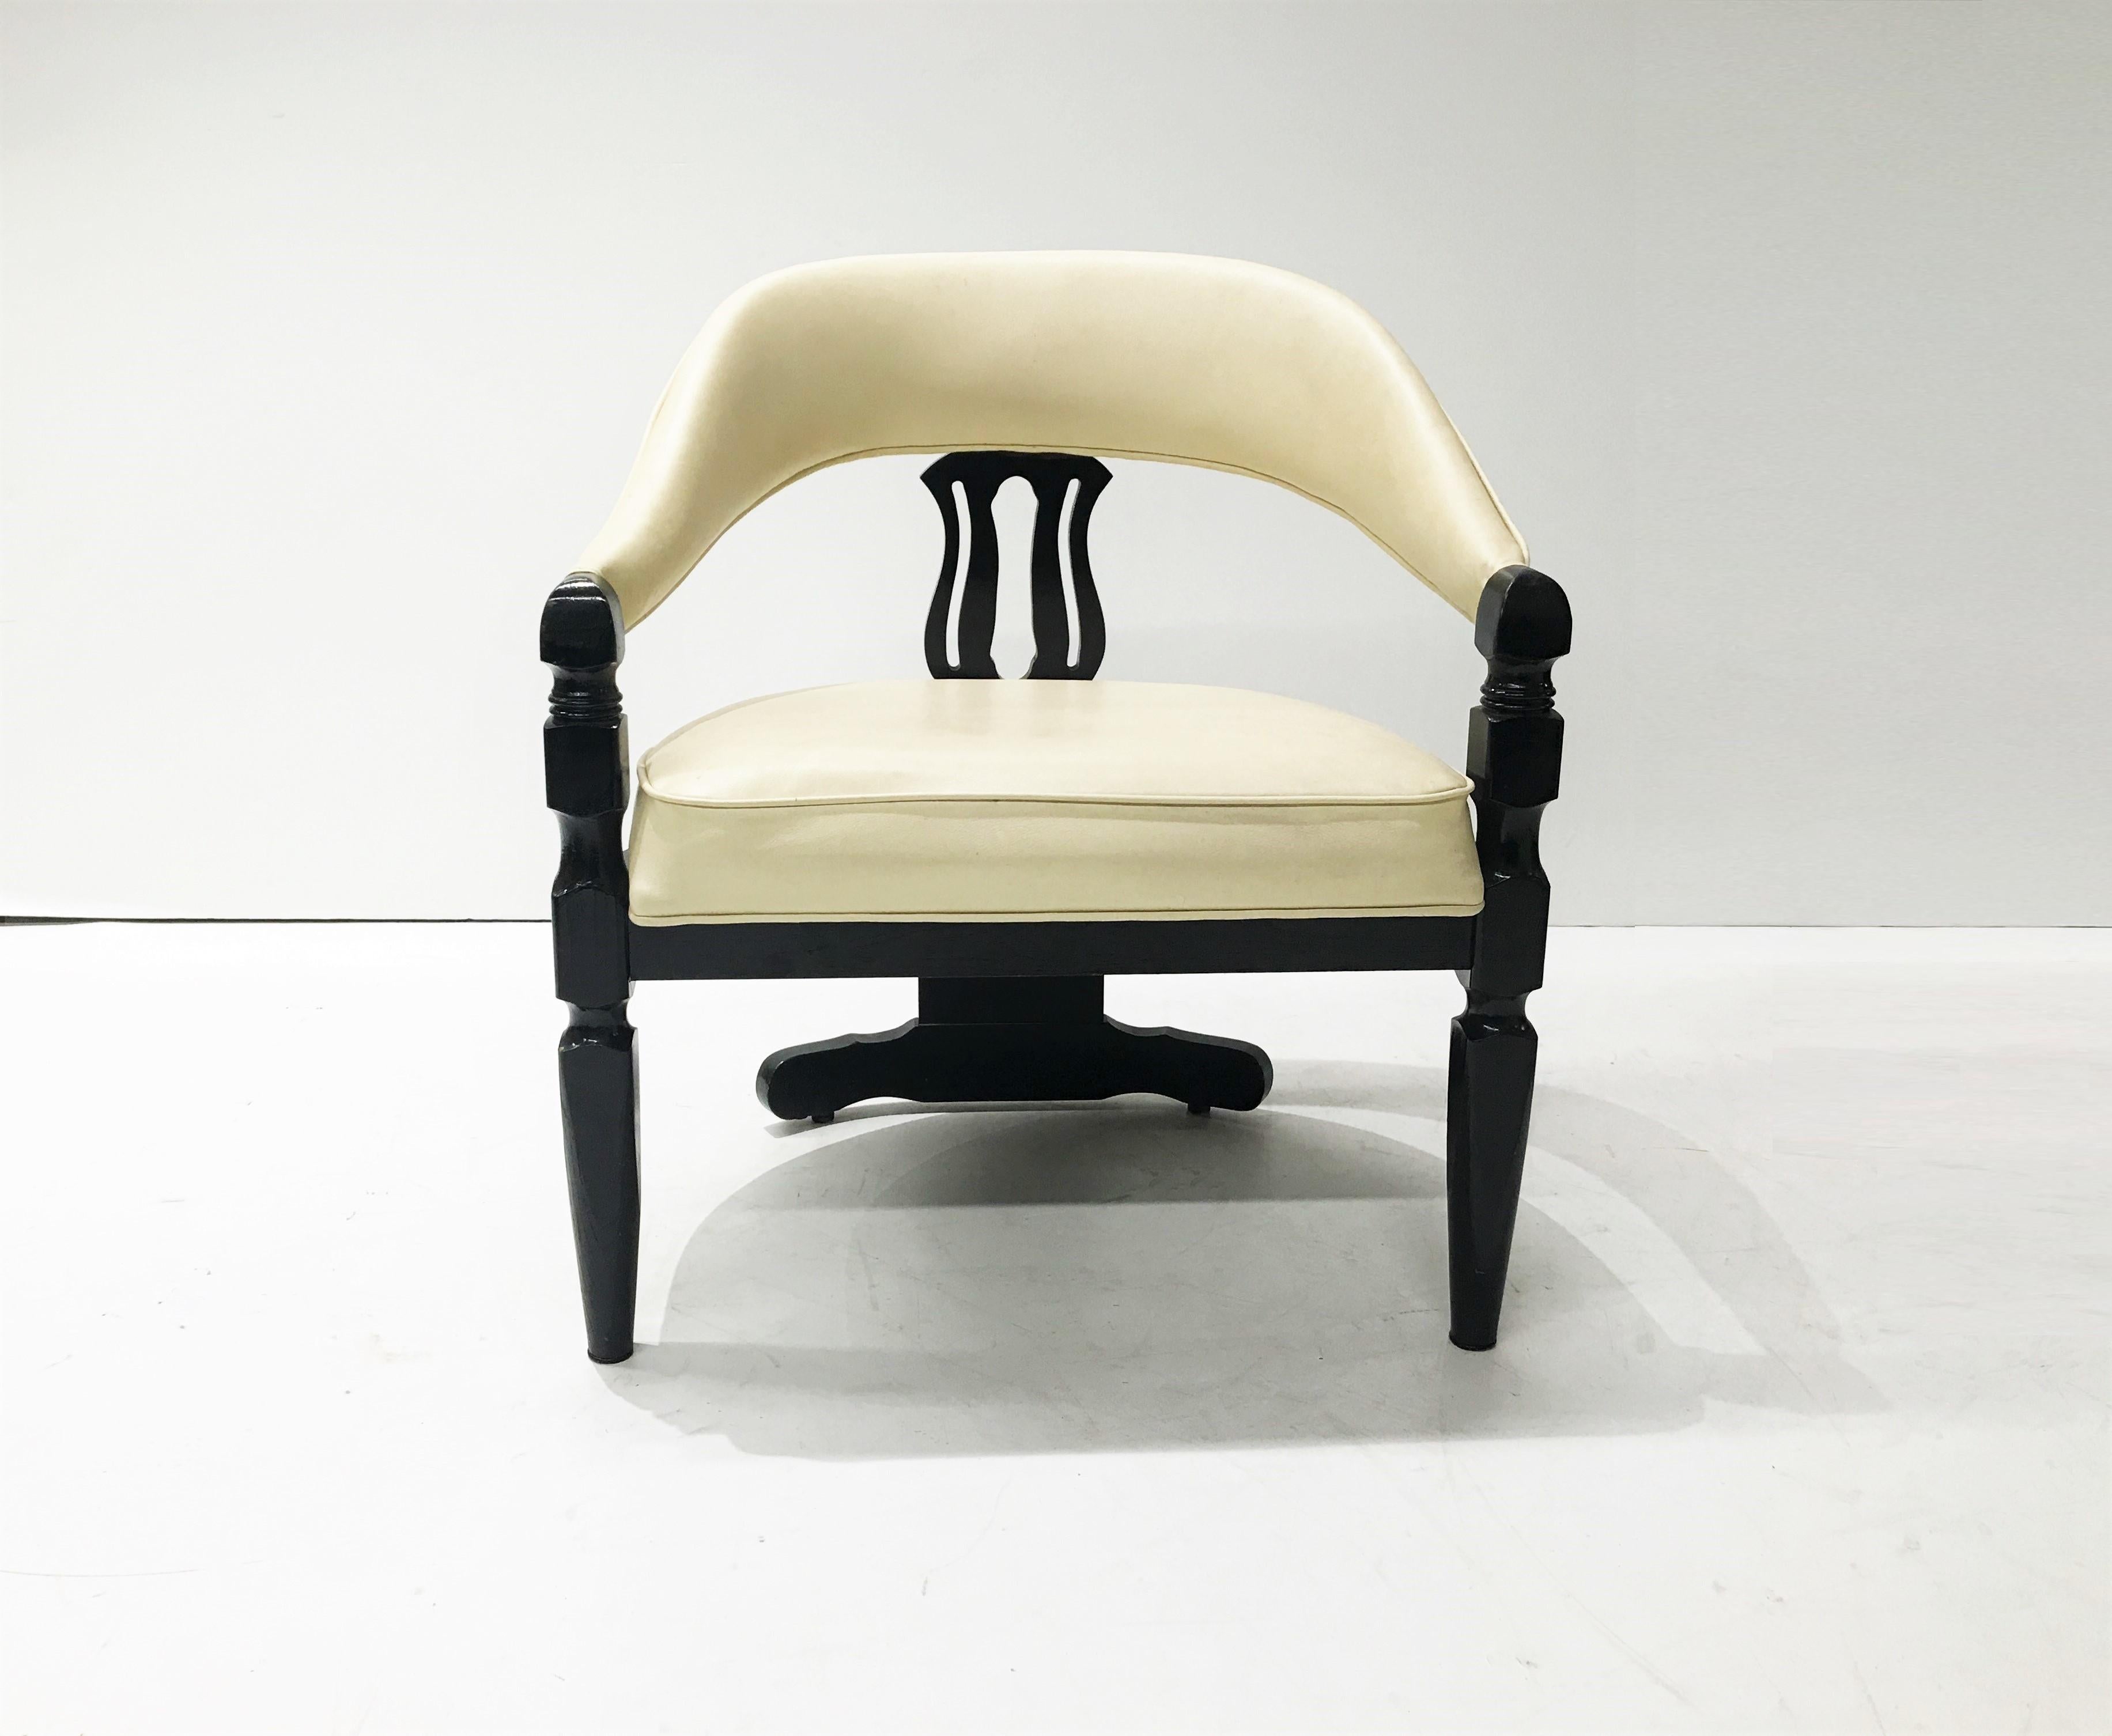 Four Mid-Century Modern Chinese inspired 3-legged armchairs. The low profile armchairs have wood frames in dark black finish and upholstered in off-white vinyl. The upholstered form is powerful with its’ robust sloped arm rails that terminate in